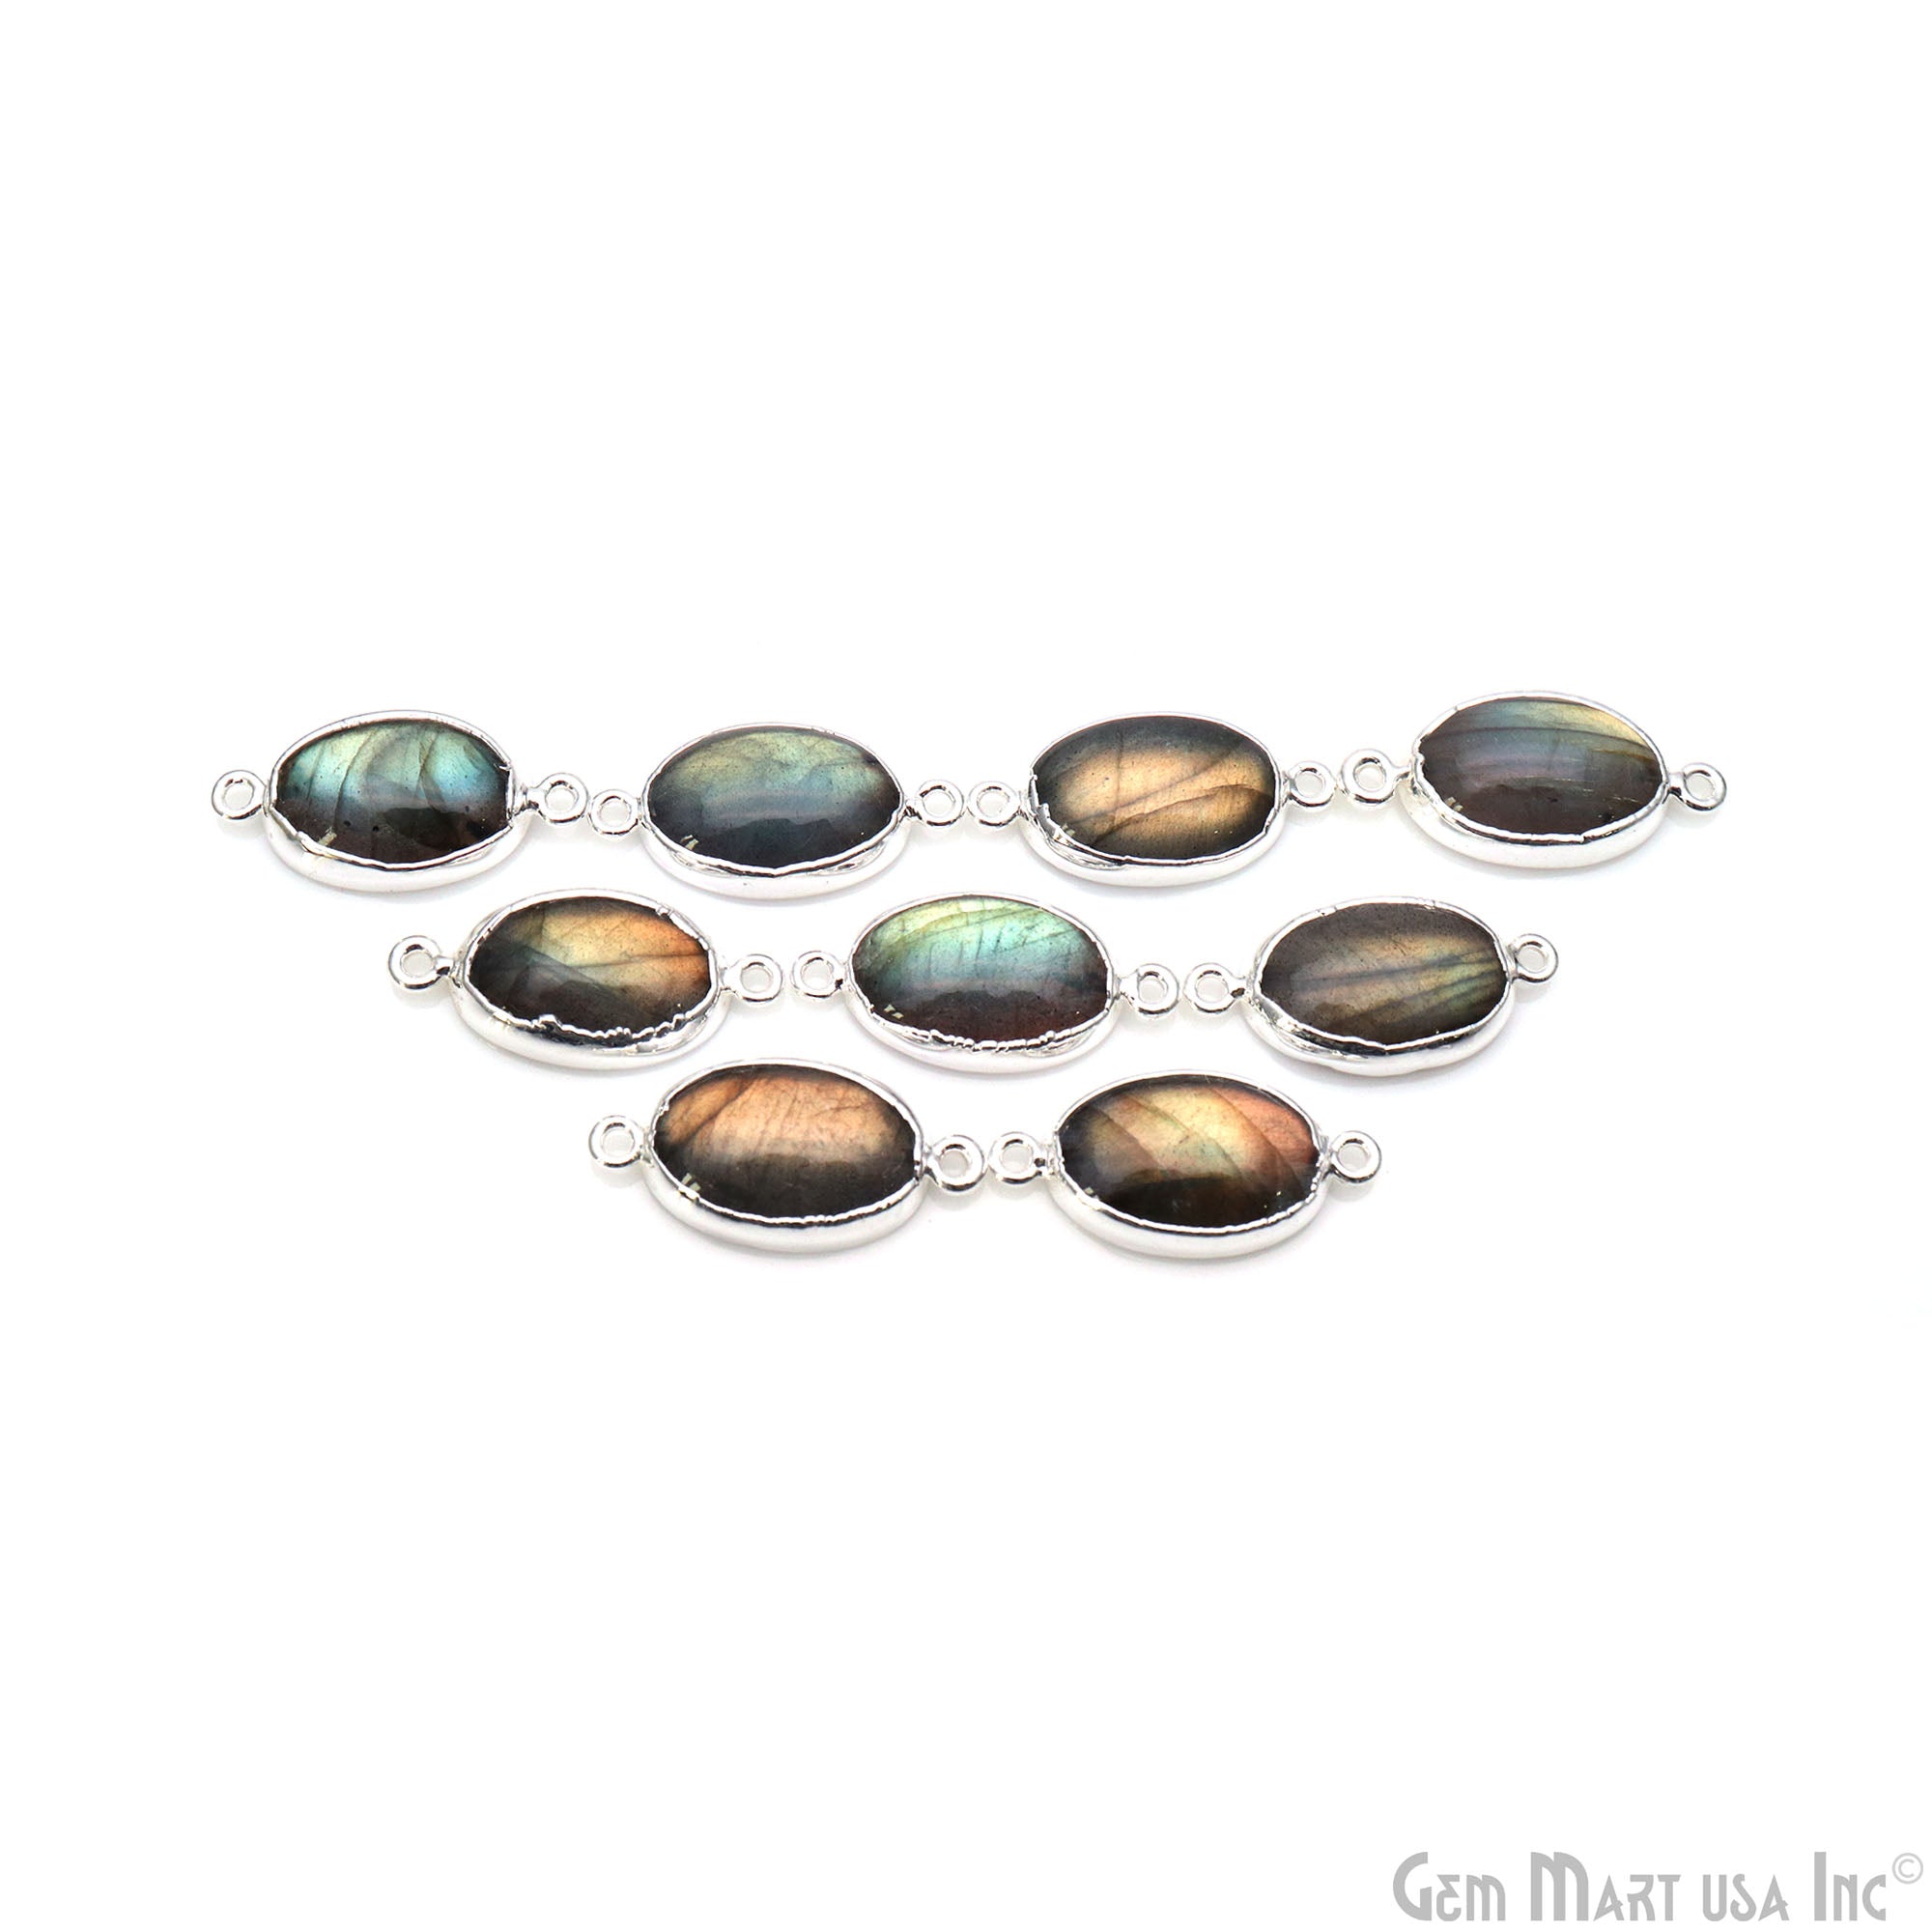 Flashy Labradorite 27x13mm Cabochon Oval Double Bail Silver Electroplated Gemstone Connector